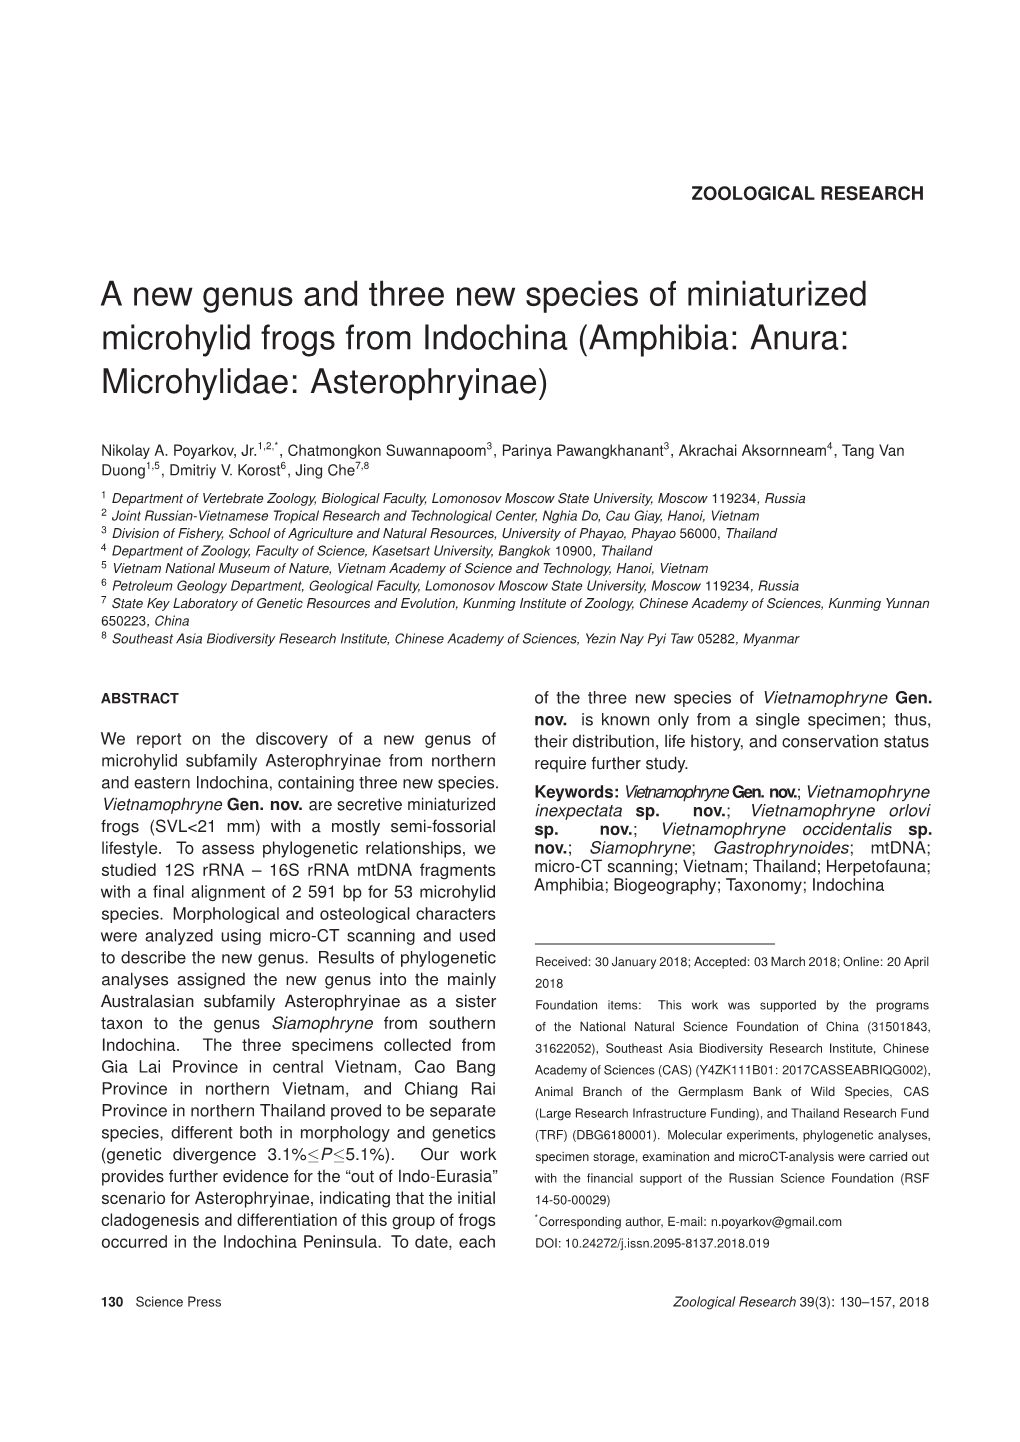 A New Genus and Three New Species of Miniaturized Microhylid Frogs from Indochina (Amphibia: Anura: Microhylidae: Asterophryinae)